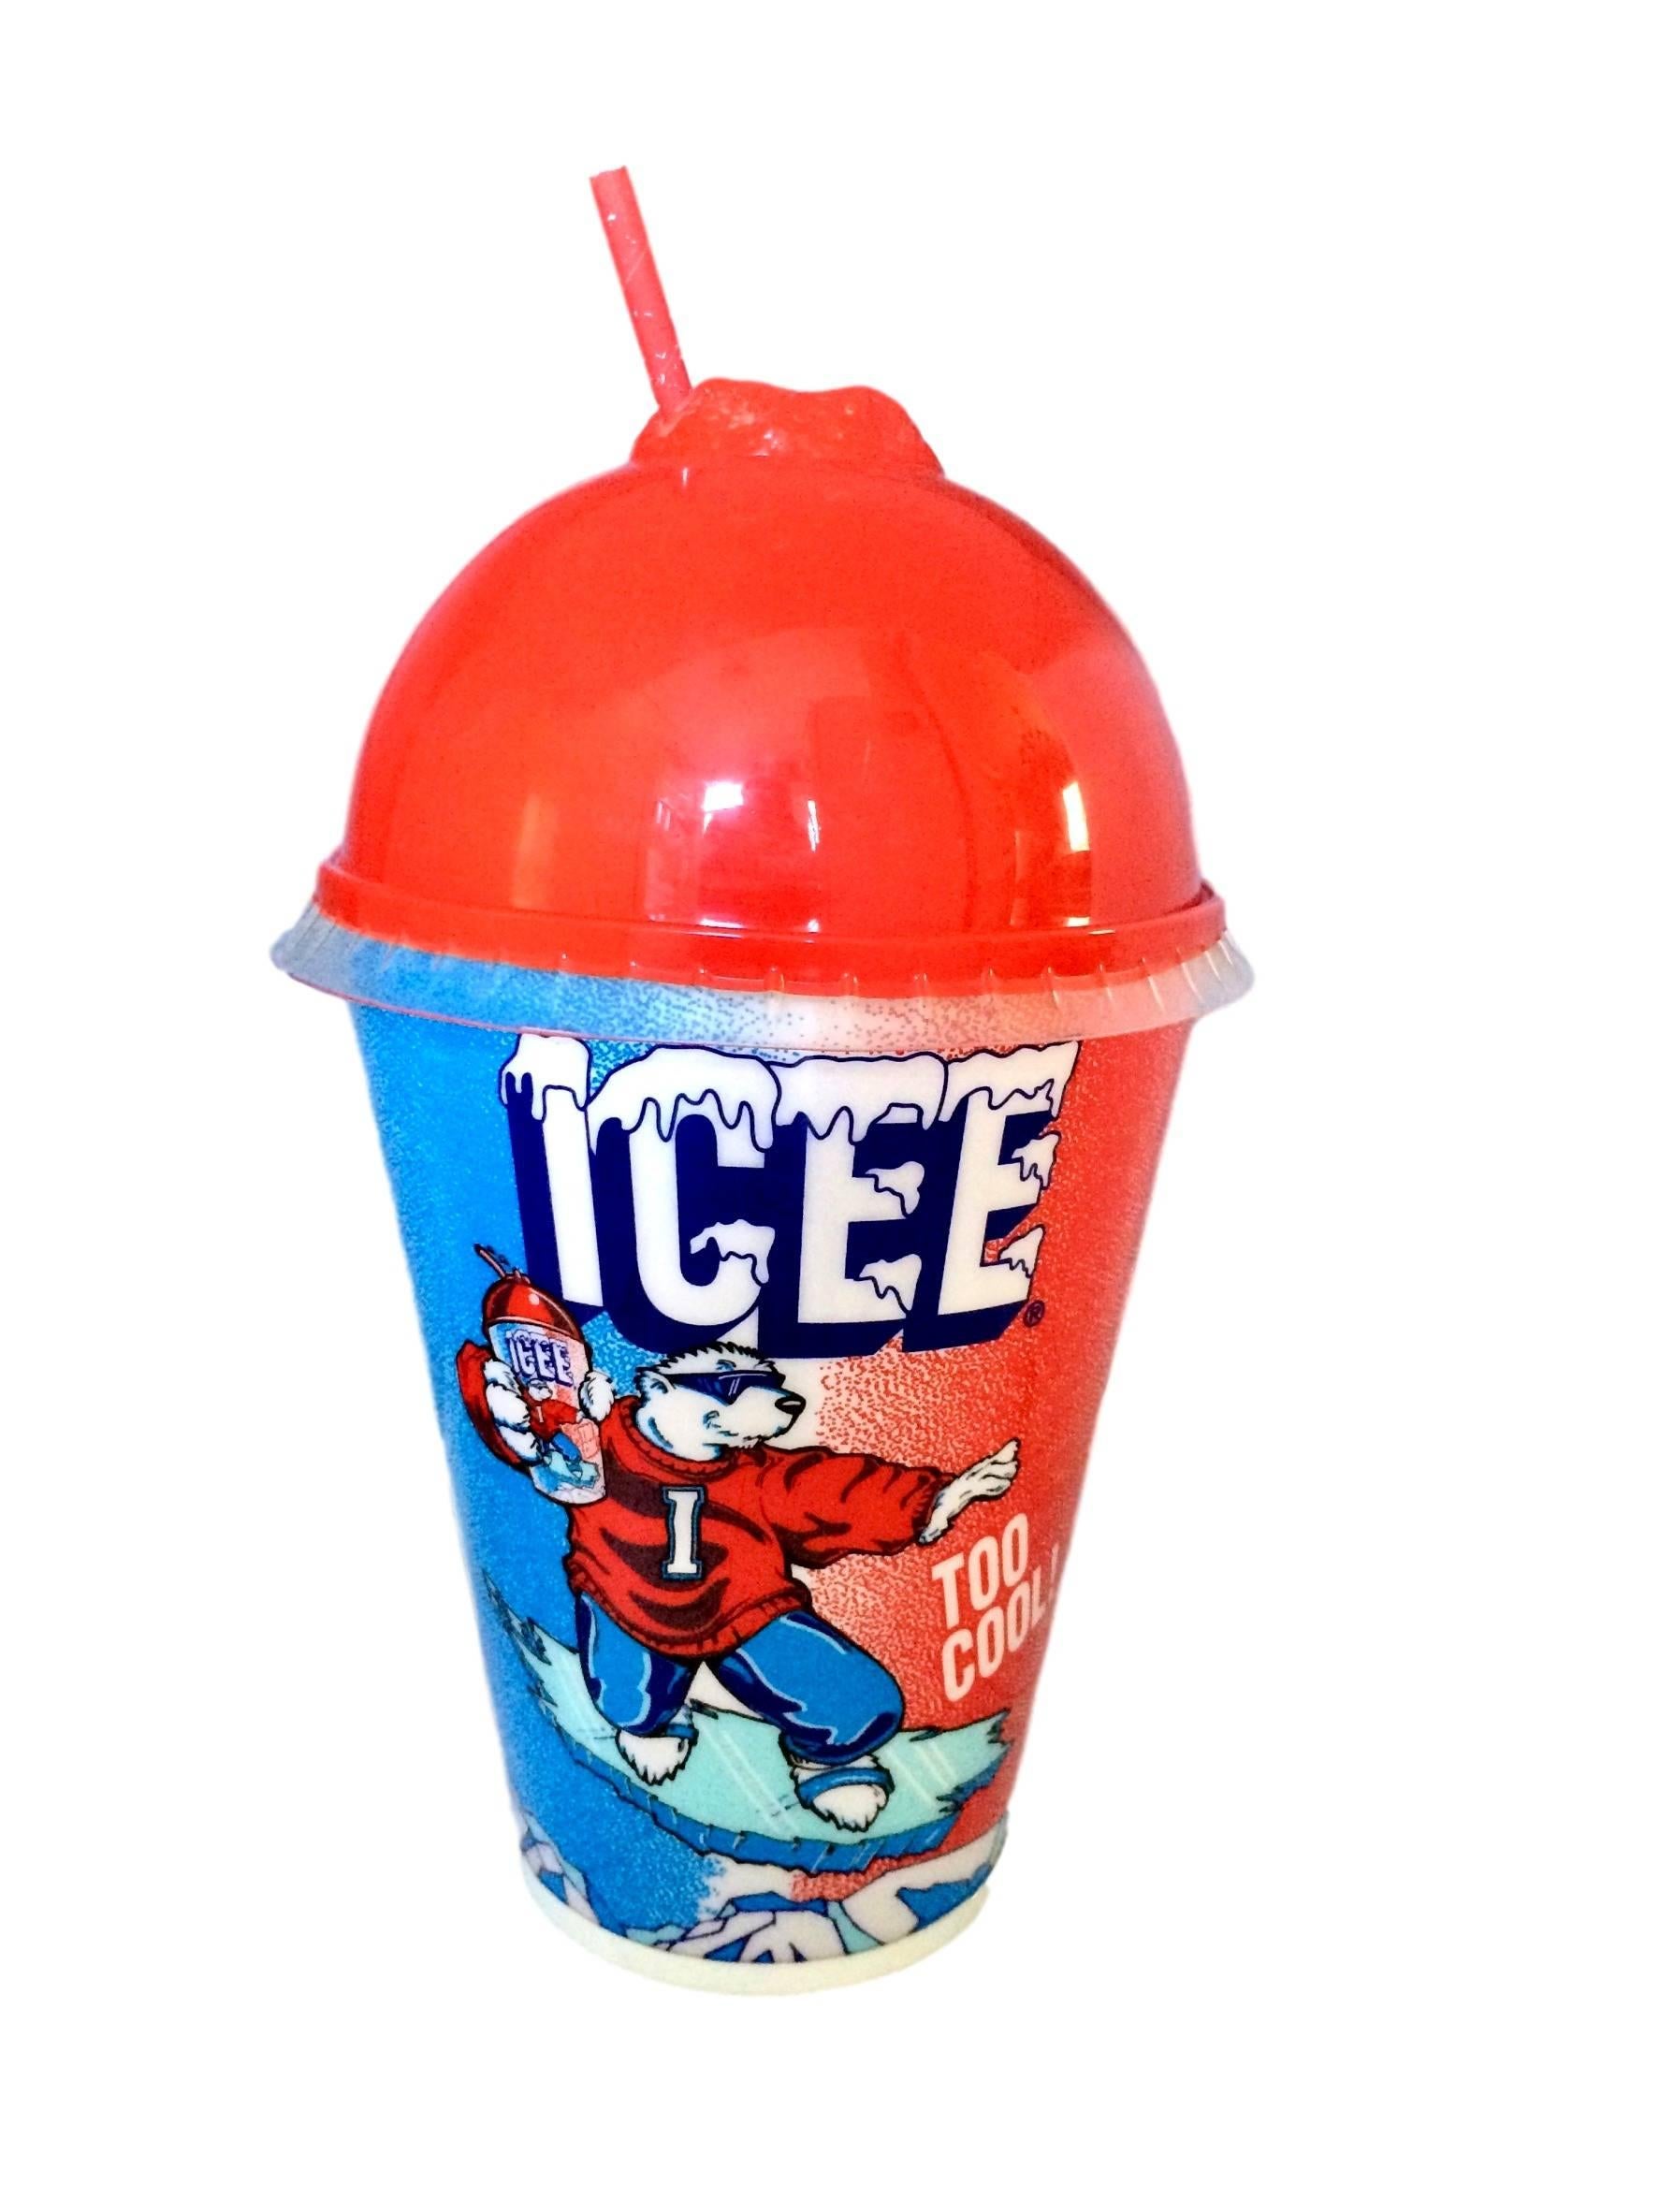 Vintage Icee cup light. Great piece of movie-going ephemera. Great nightlight for a kid's room or pop art for the house. Excellent vintage condition.